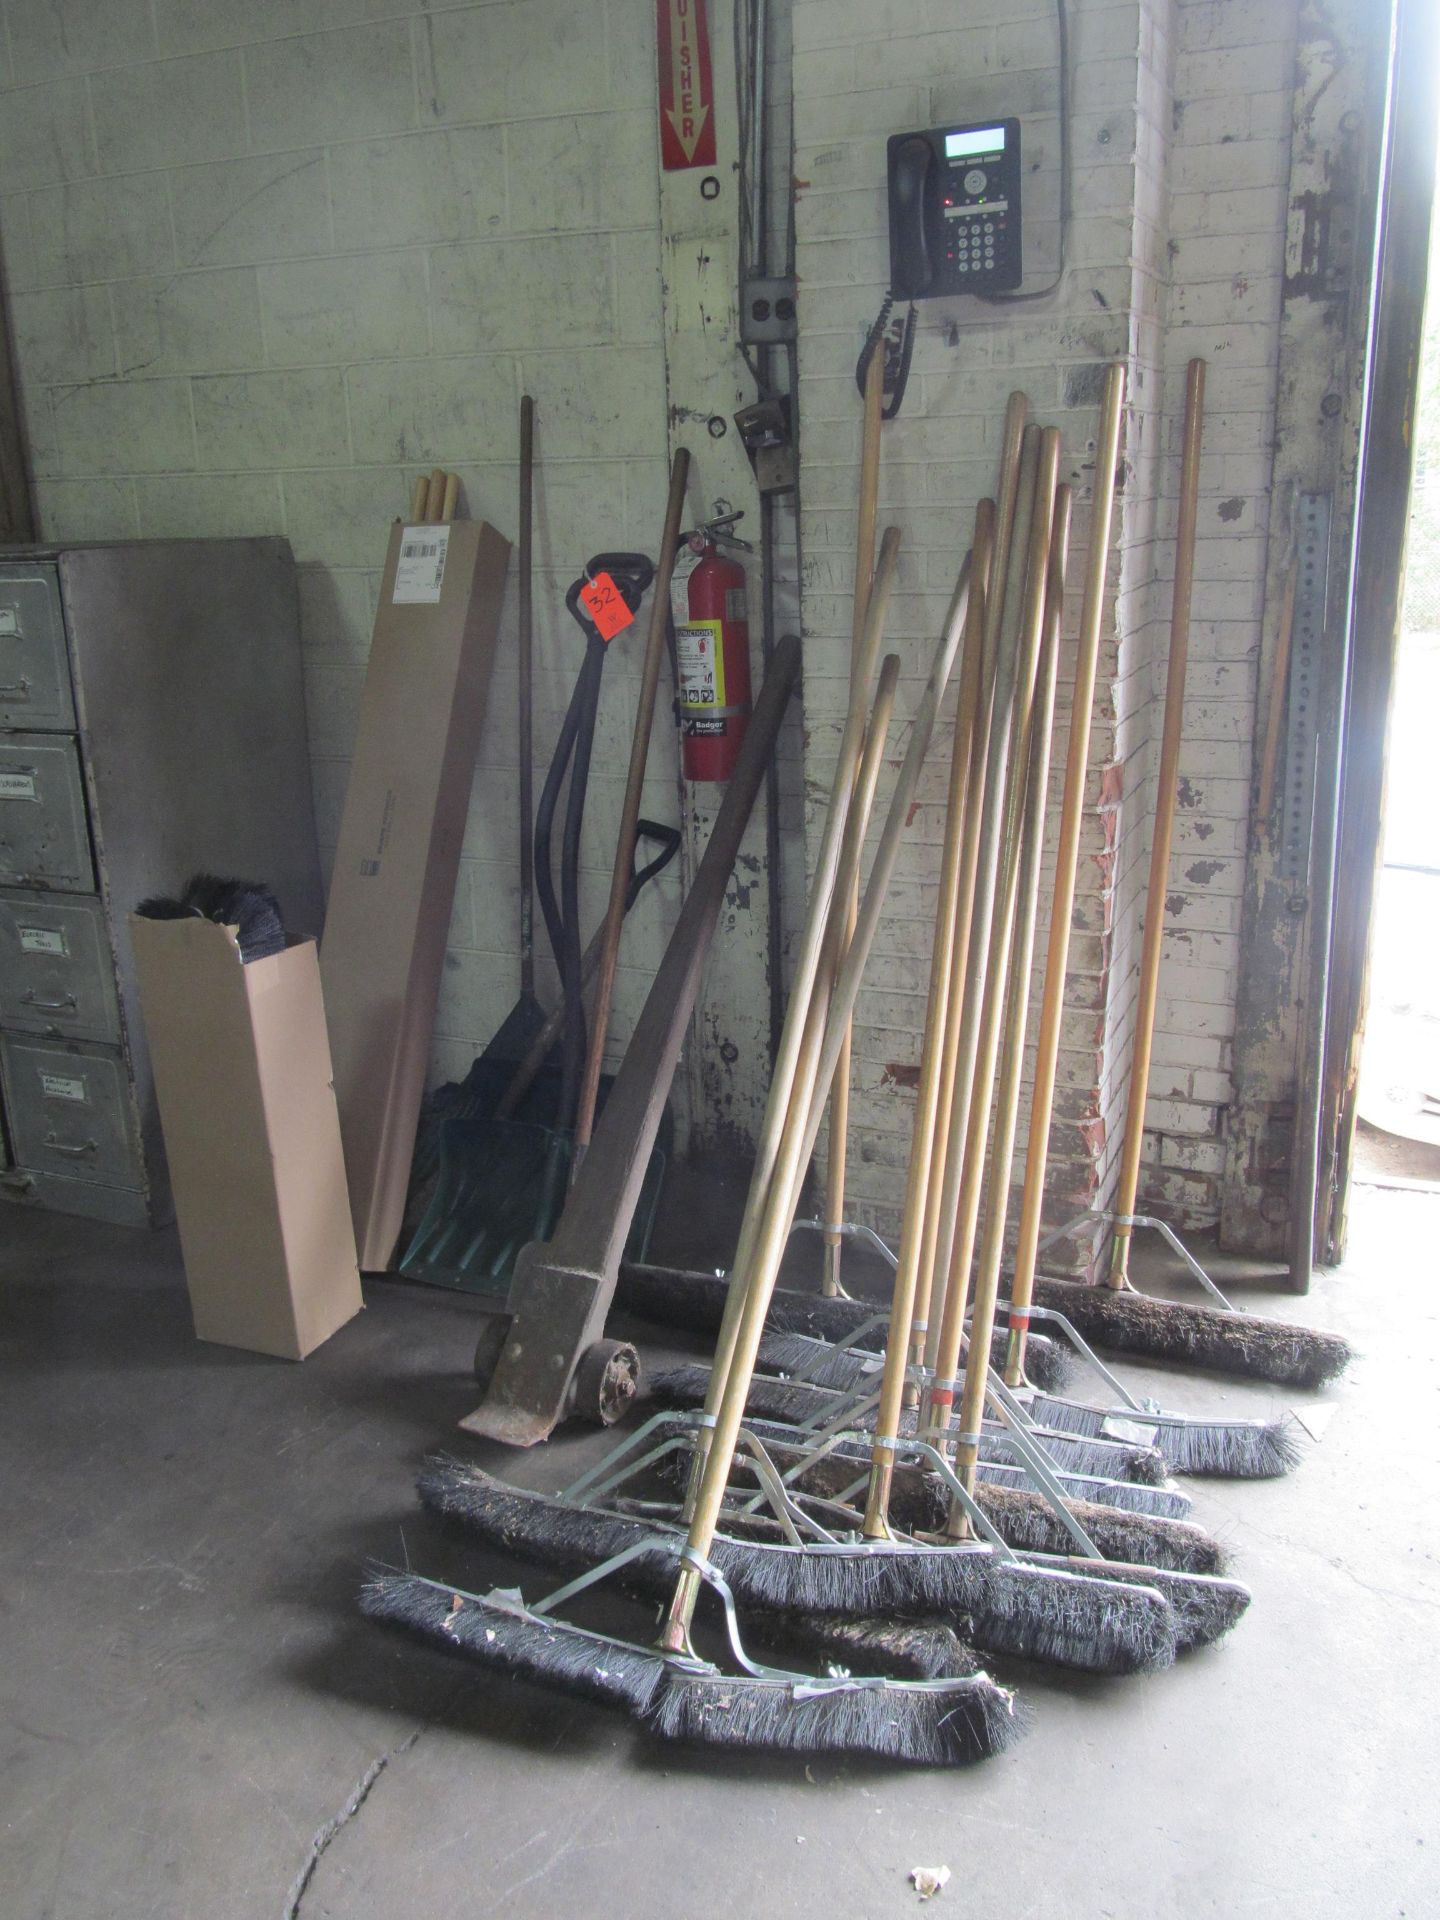 Lot - Assorted Brooms, (4) New Broom Heads with Handles, Johnson Bar - Image 2 of 2